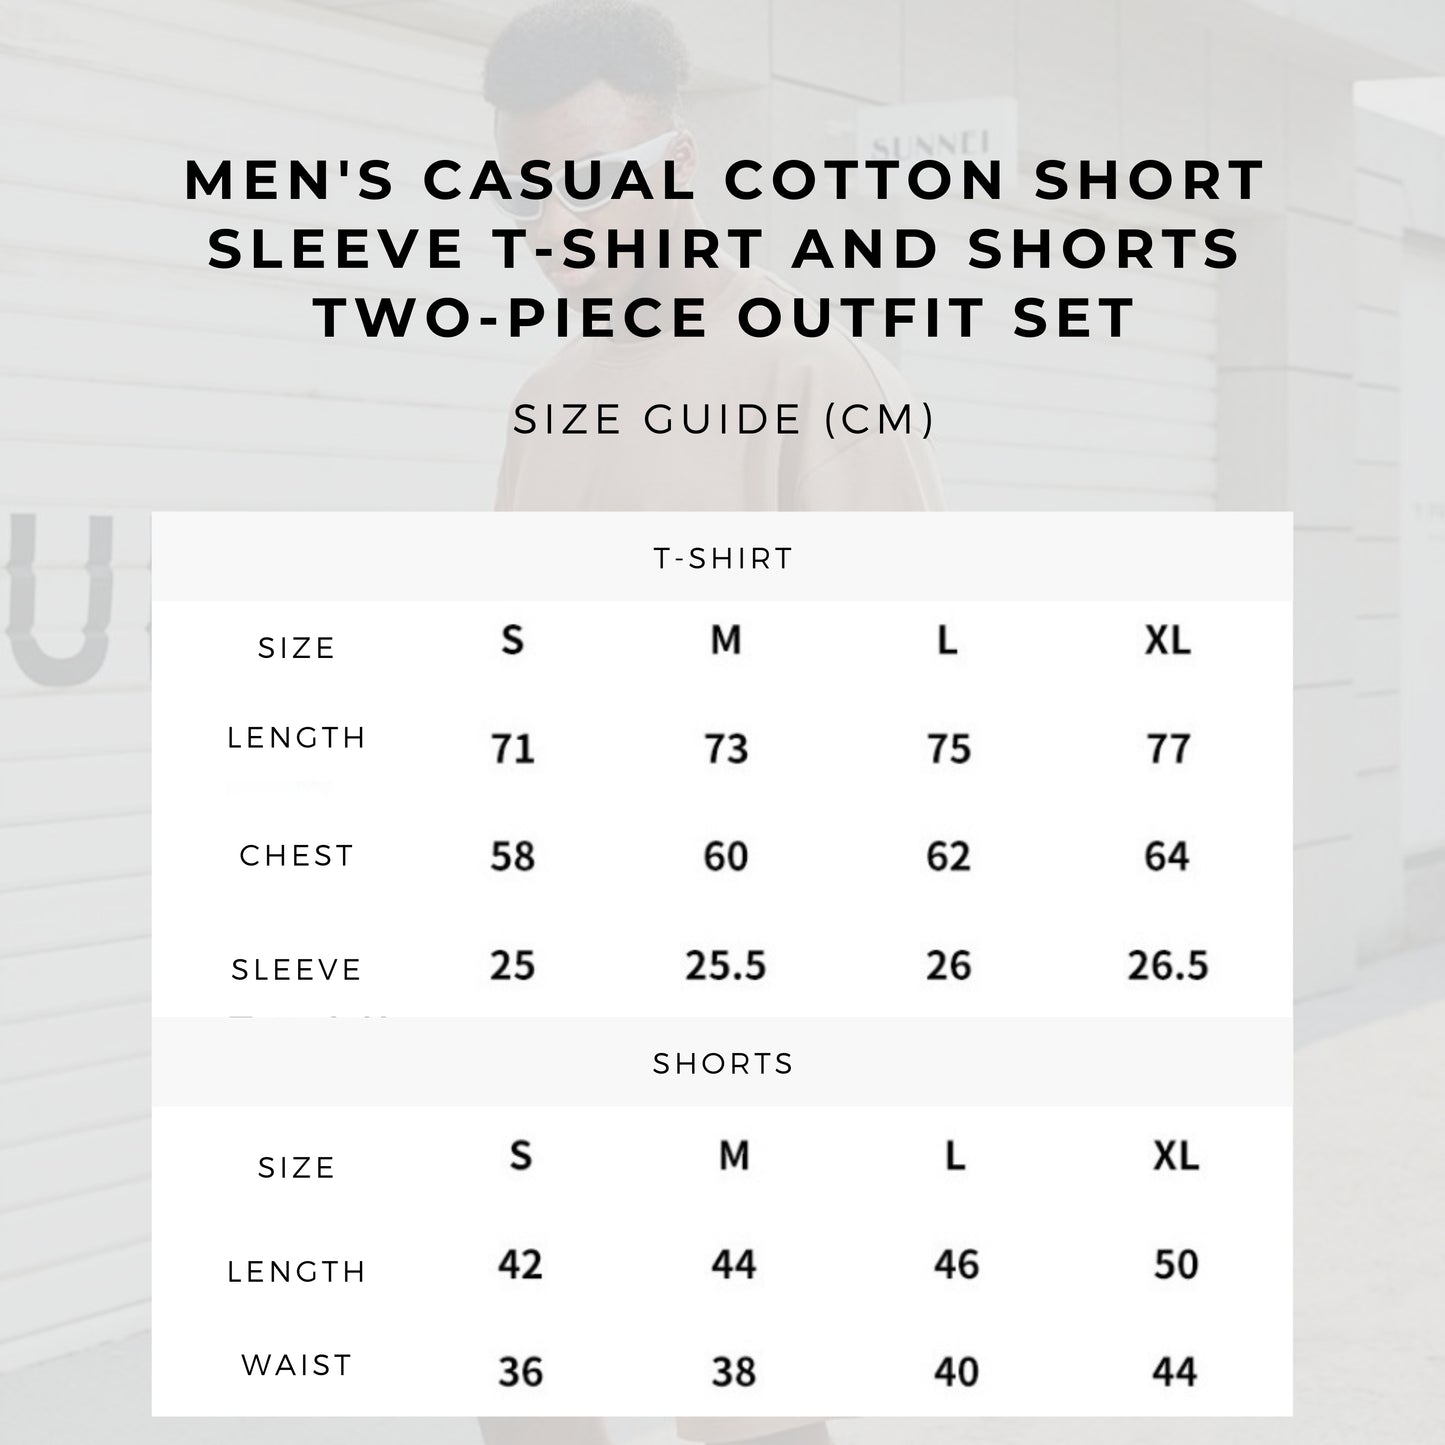 Men's Casual Cotton Short Sleeve T-shirt and Shorts Two-piece Outfit Set size